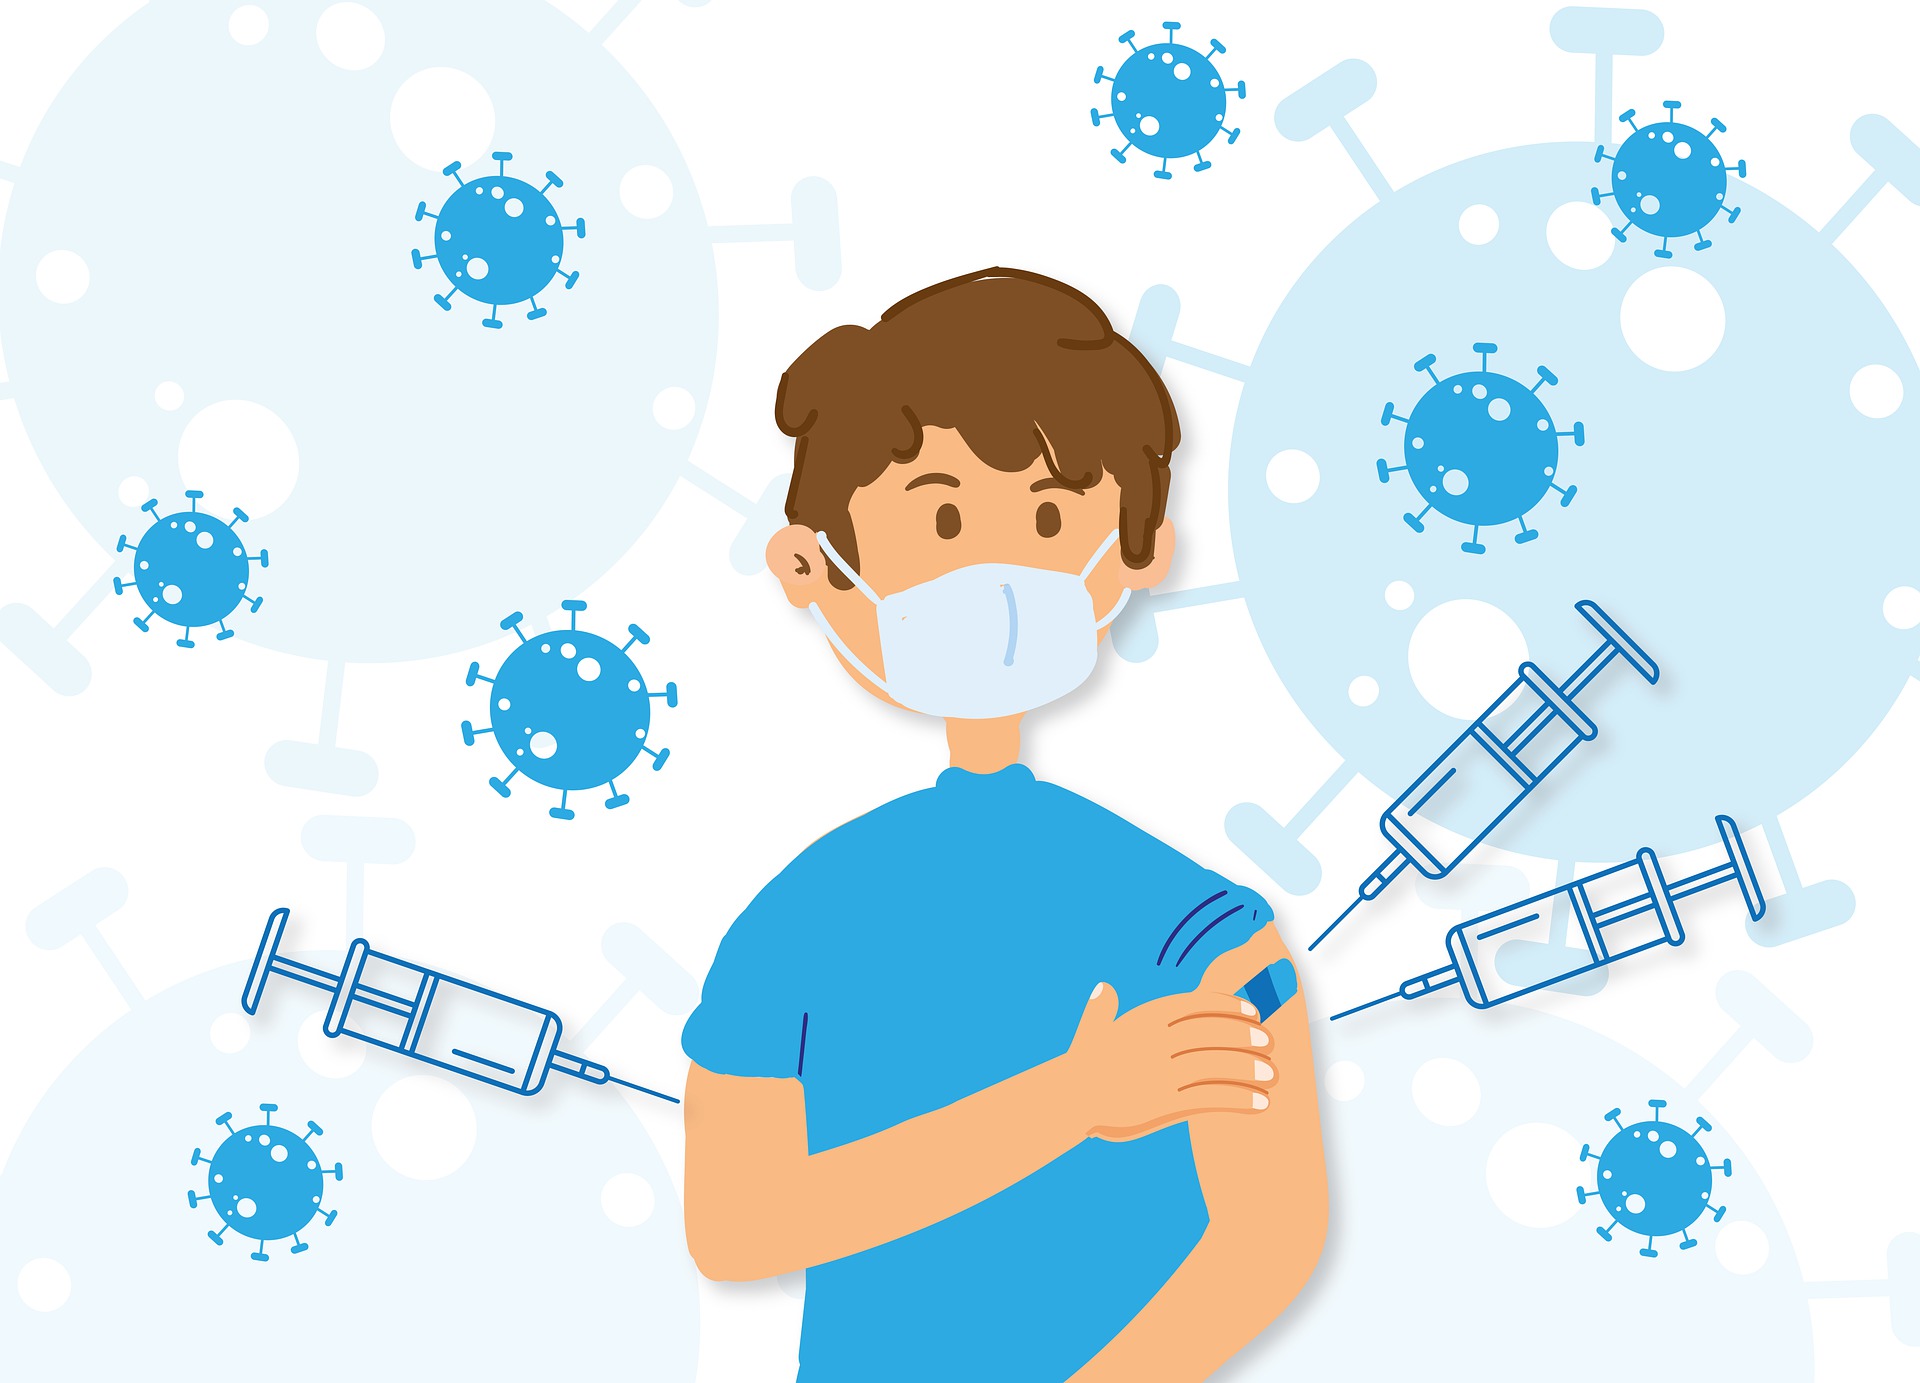 https://pixabay.com/illustrations/booster-boost-vaccination-6910917/